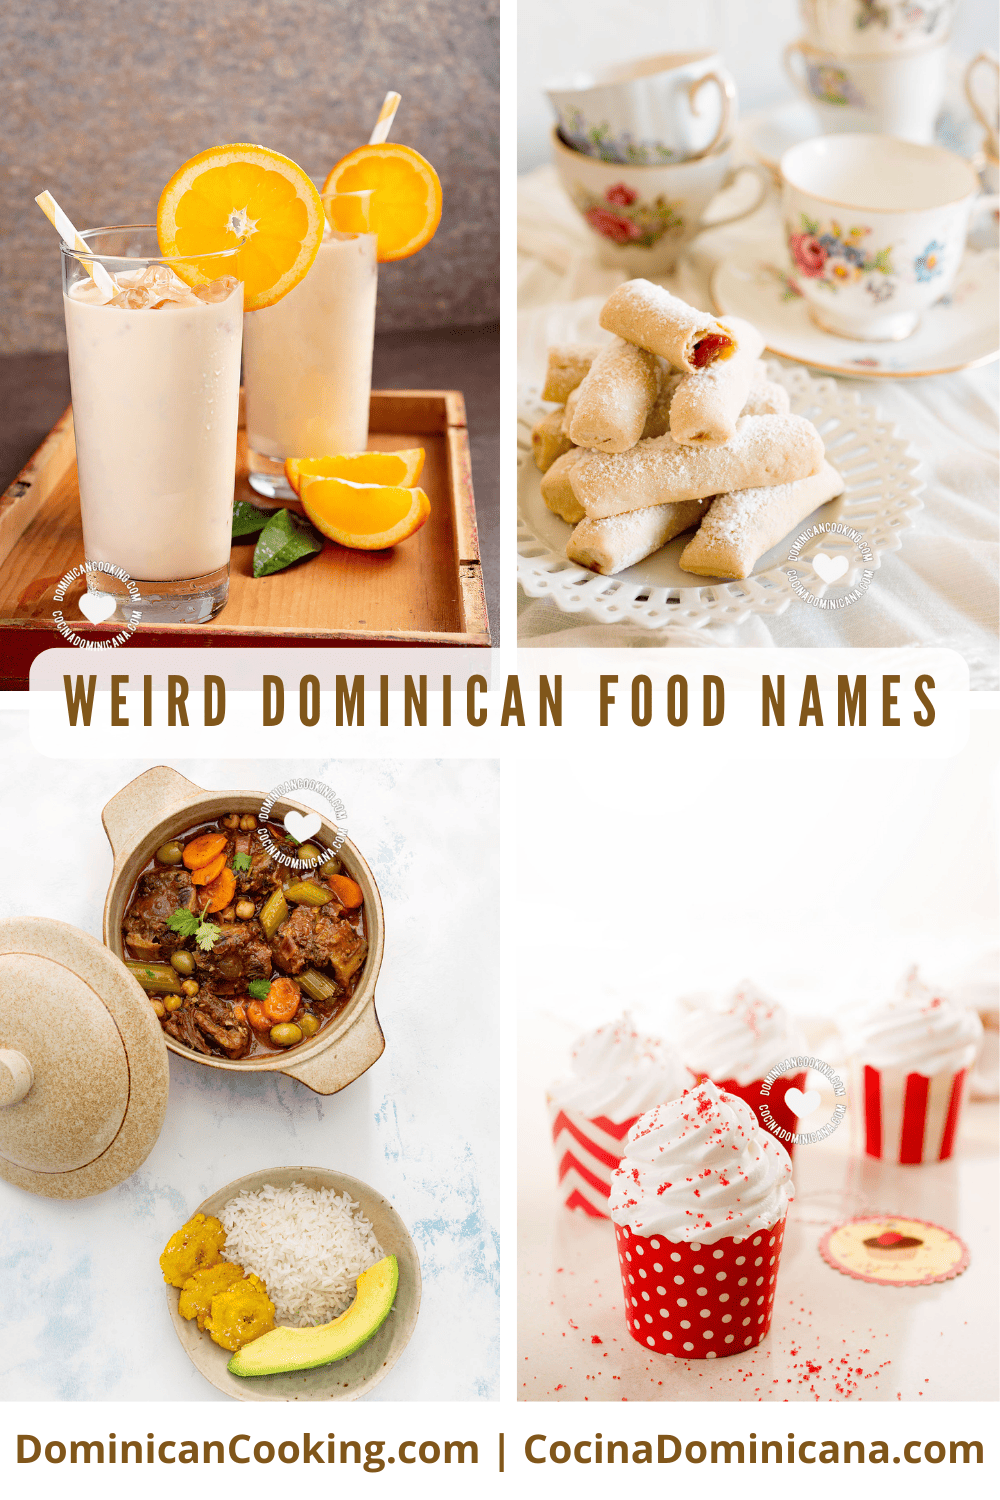 4 Dominican dishes with weird names.